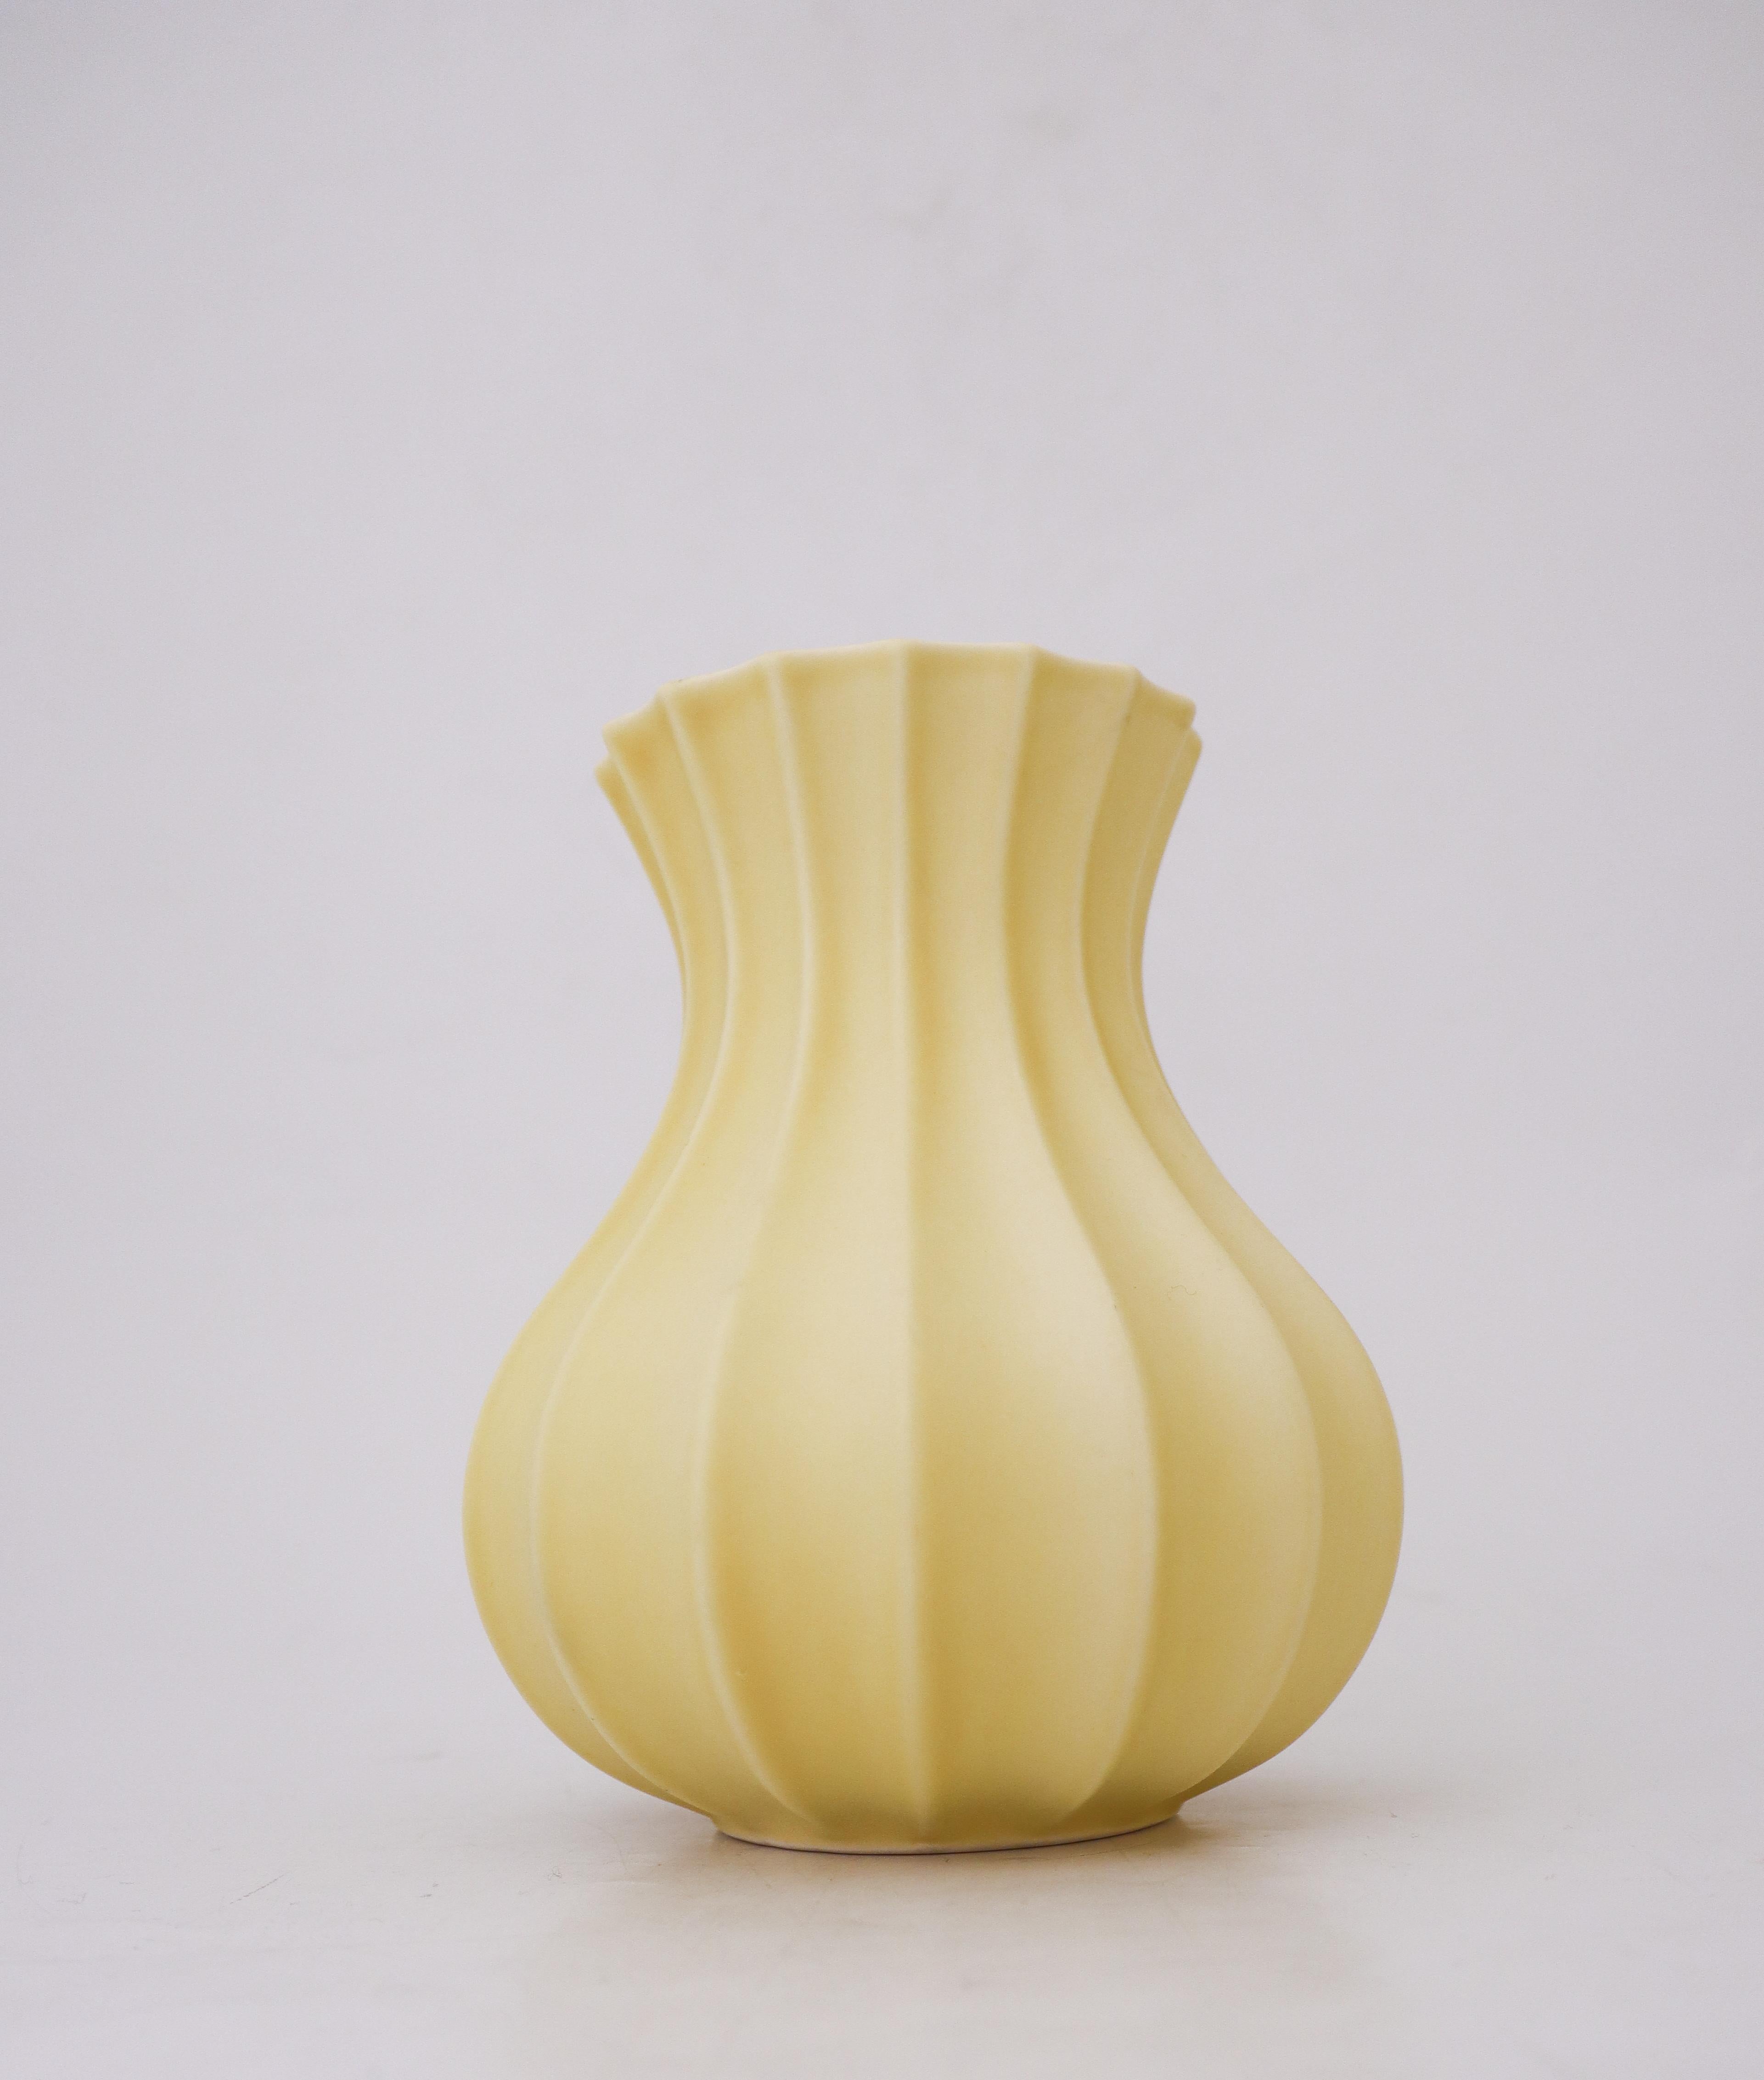 A lovely yellow vase designed by Pia Rönndahl at Rörstrand in the 1980s. The vase is 17.5 cm high and in excellent condition except from some minor marks. It is marked as on photo and is 2nd quality. 

